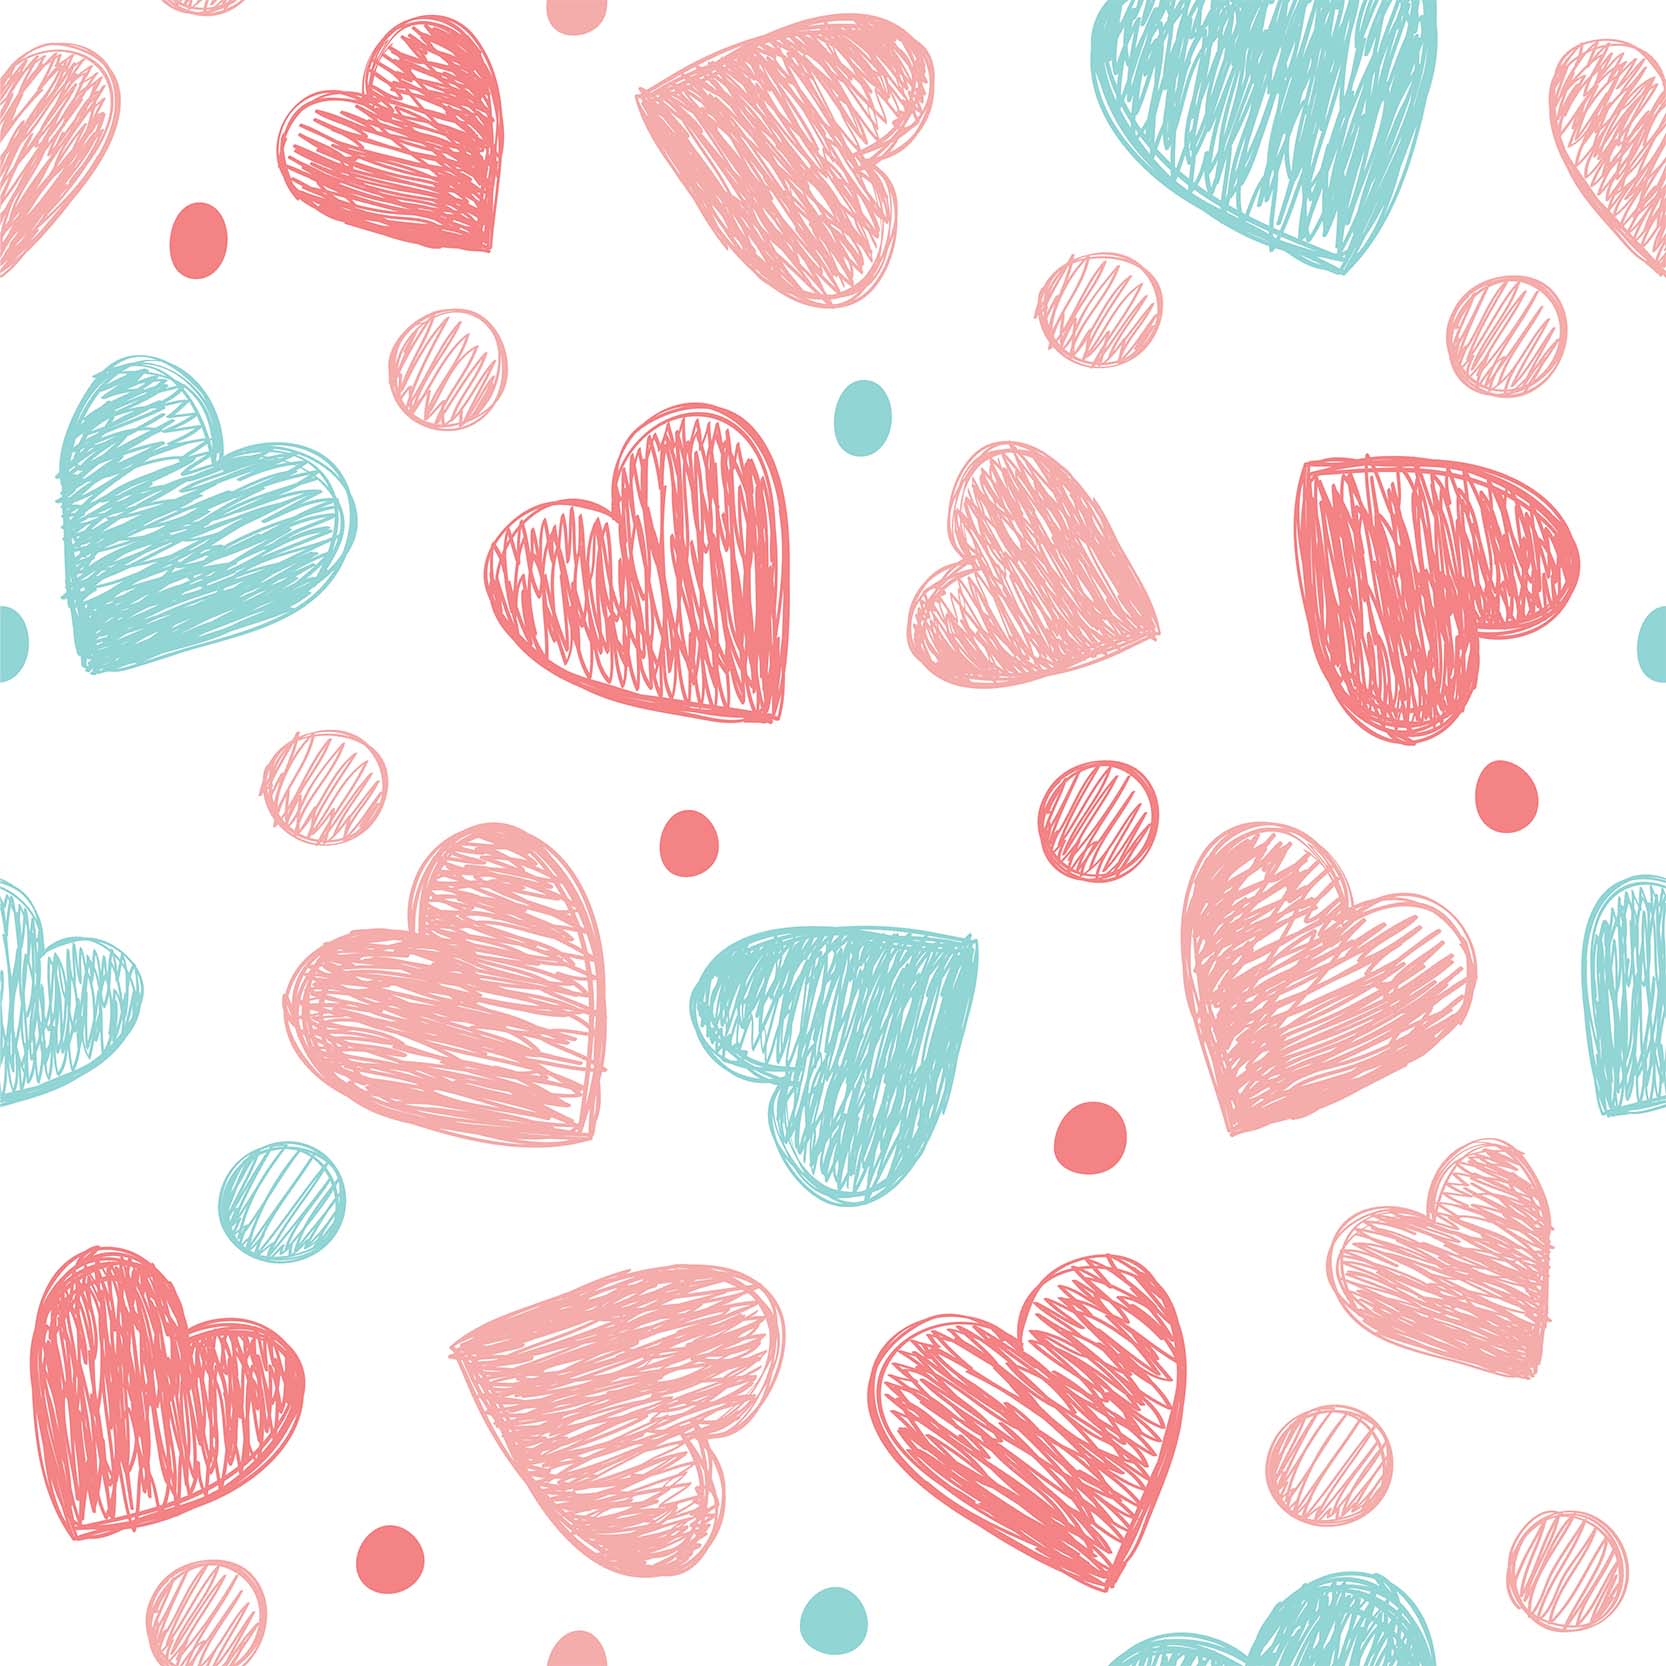 Amelia - Pink and Turquoise Heart and Polka Dot Wallpaper Mural